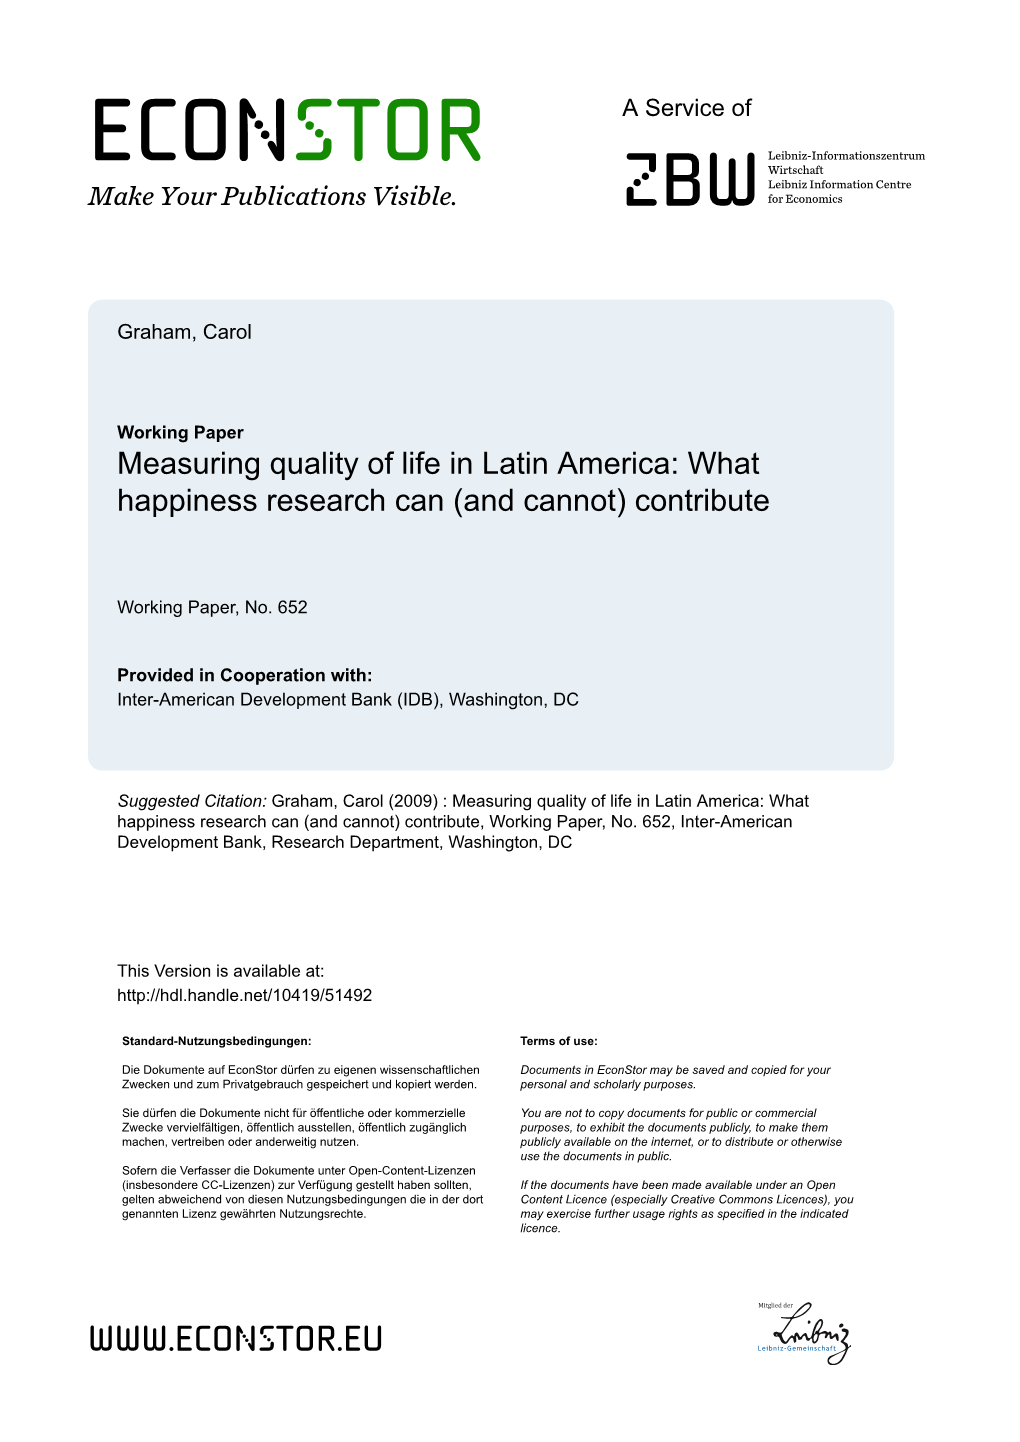 Measuring Quality of Life in Latin America: What Happiness Research Can (And Cannot) Contribute